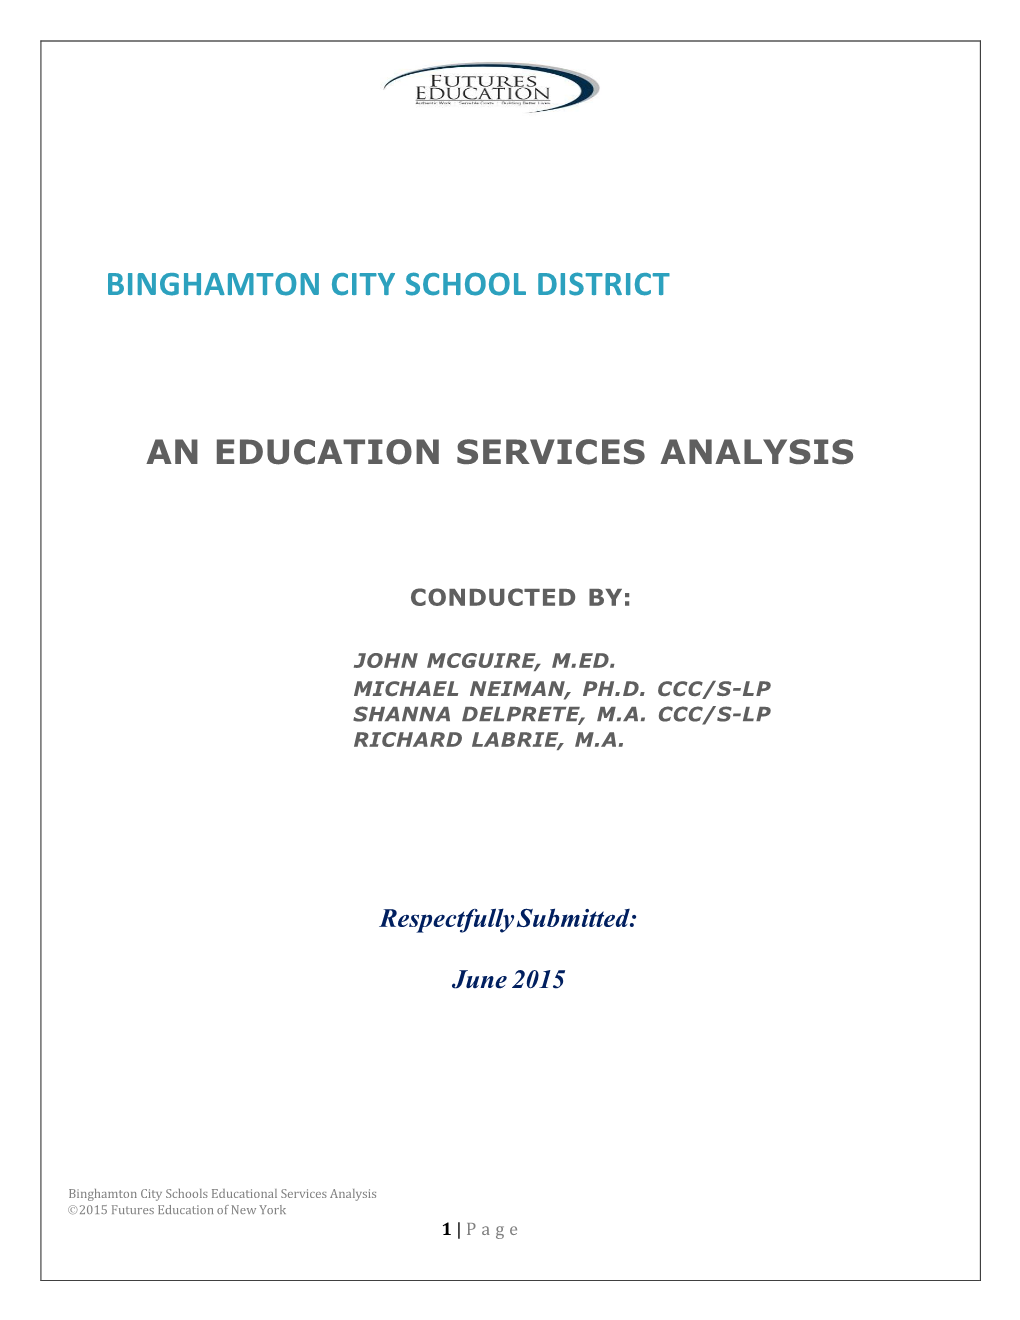 Special Education Services Analysis (2015)